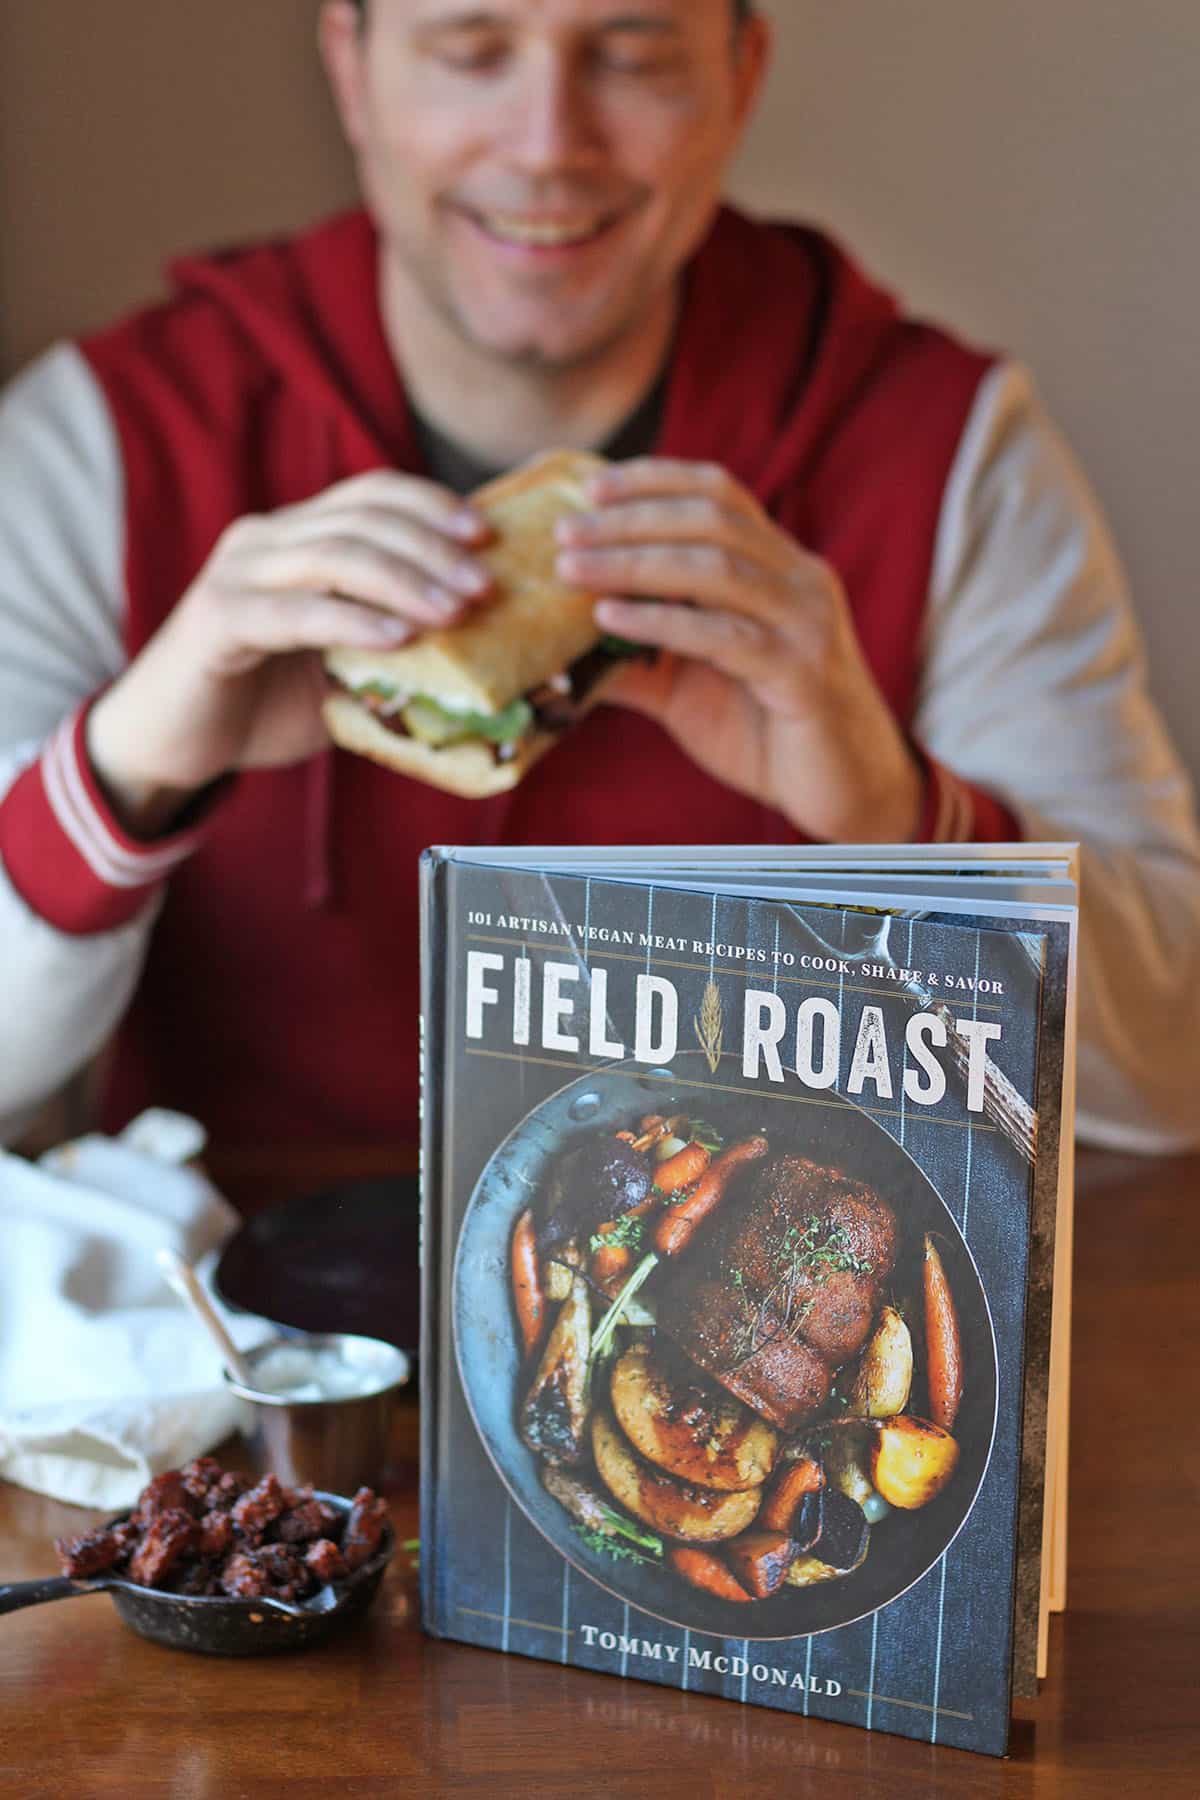 Field Roast cookbook on table. Man smiles holding sandwich in background.